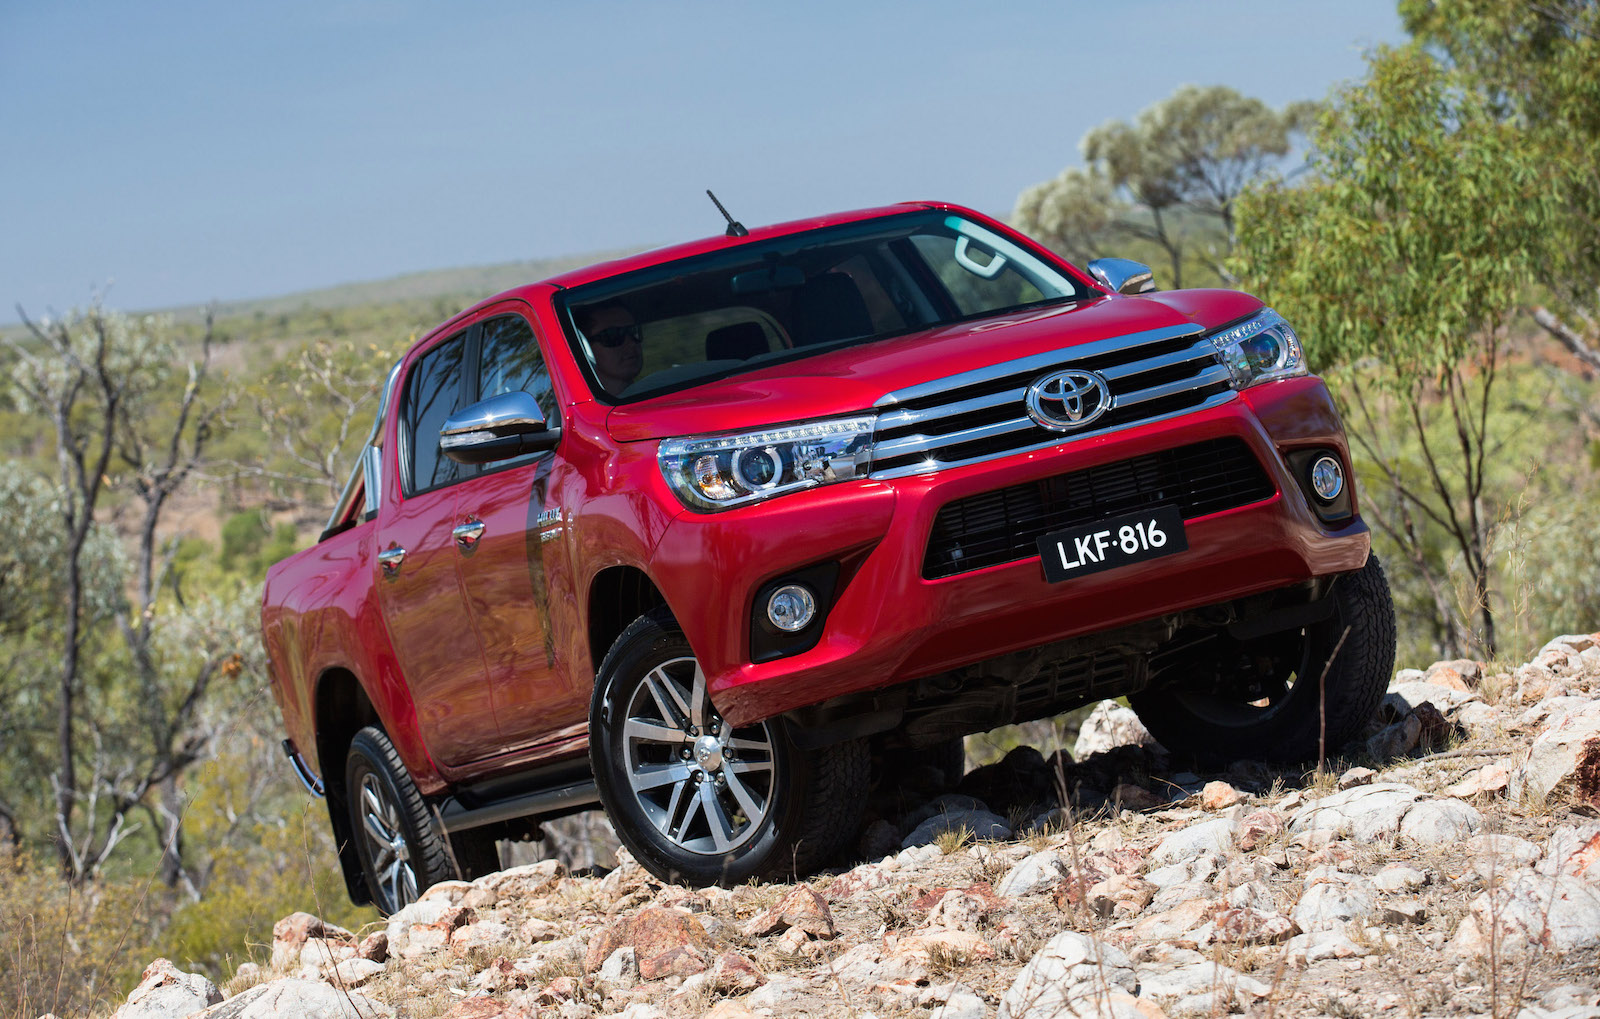 EXCLUSIVE: Toyota HiLux ‘Rugged’ off-road & ‘SRX’ luxury variants coming